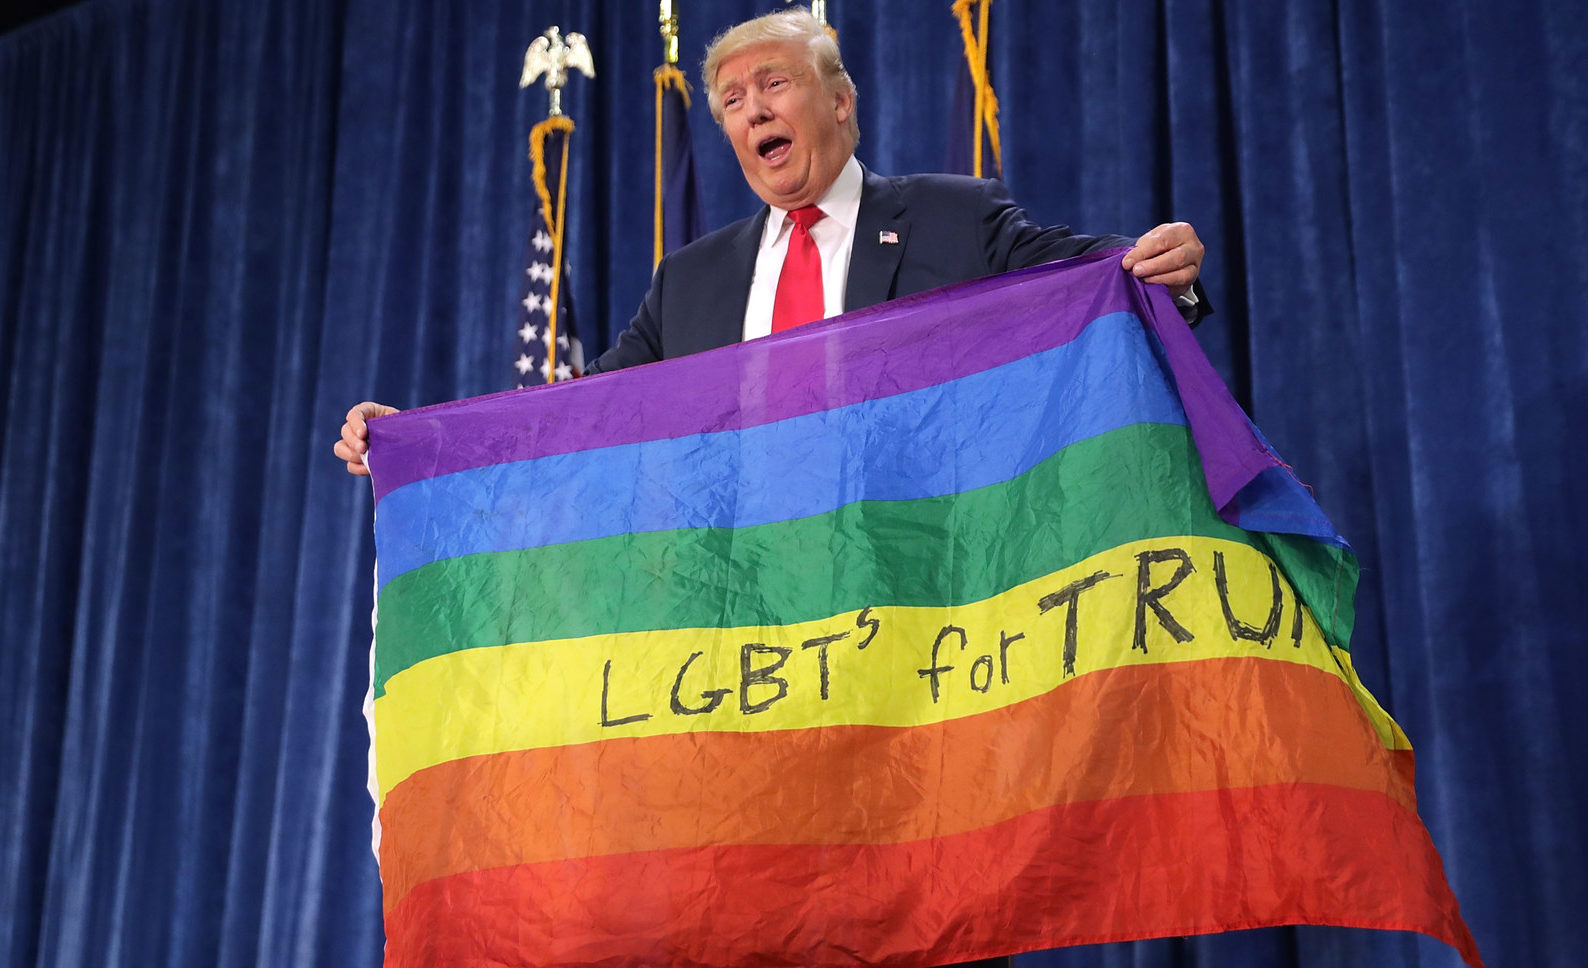 How Trump’s election could affect the LGBTQ+ community